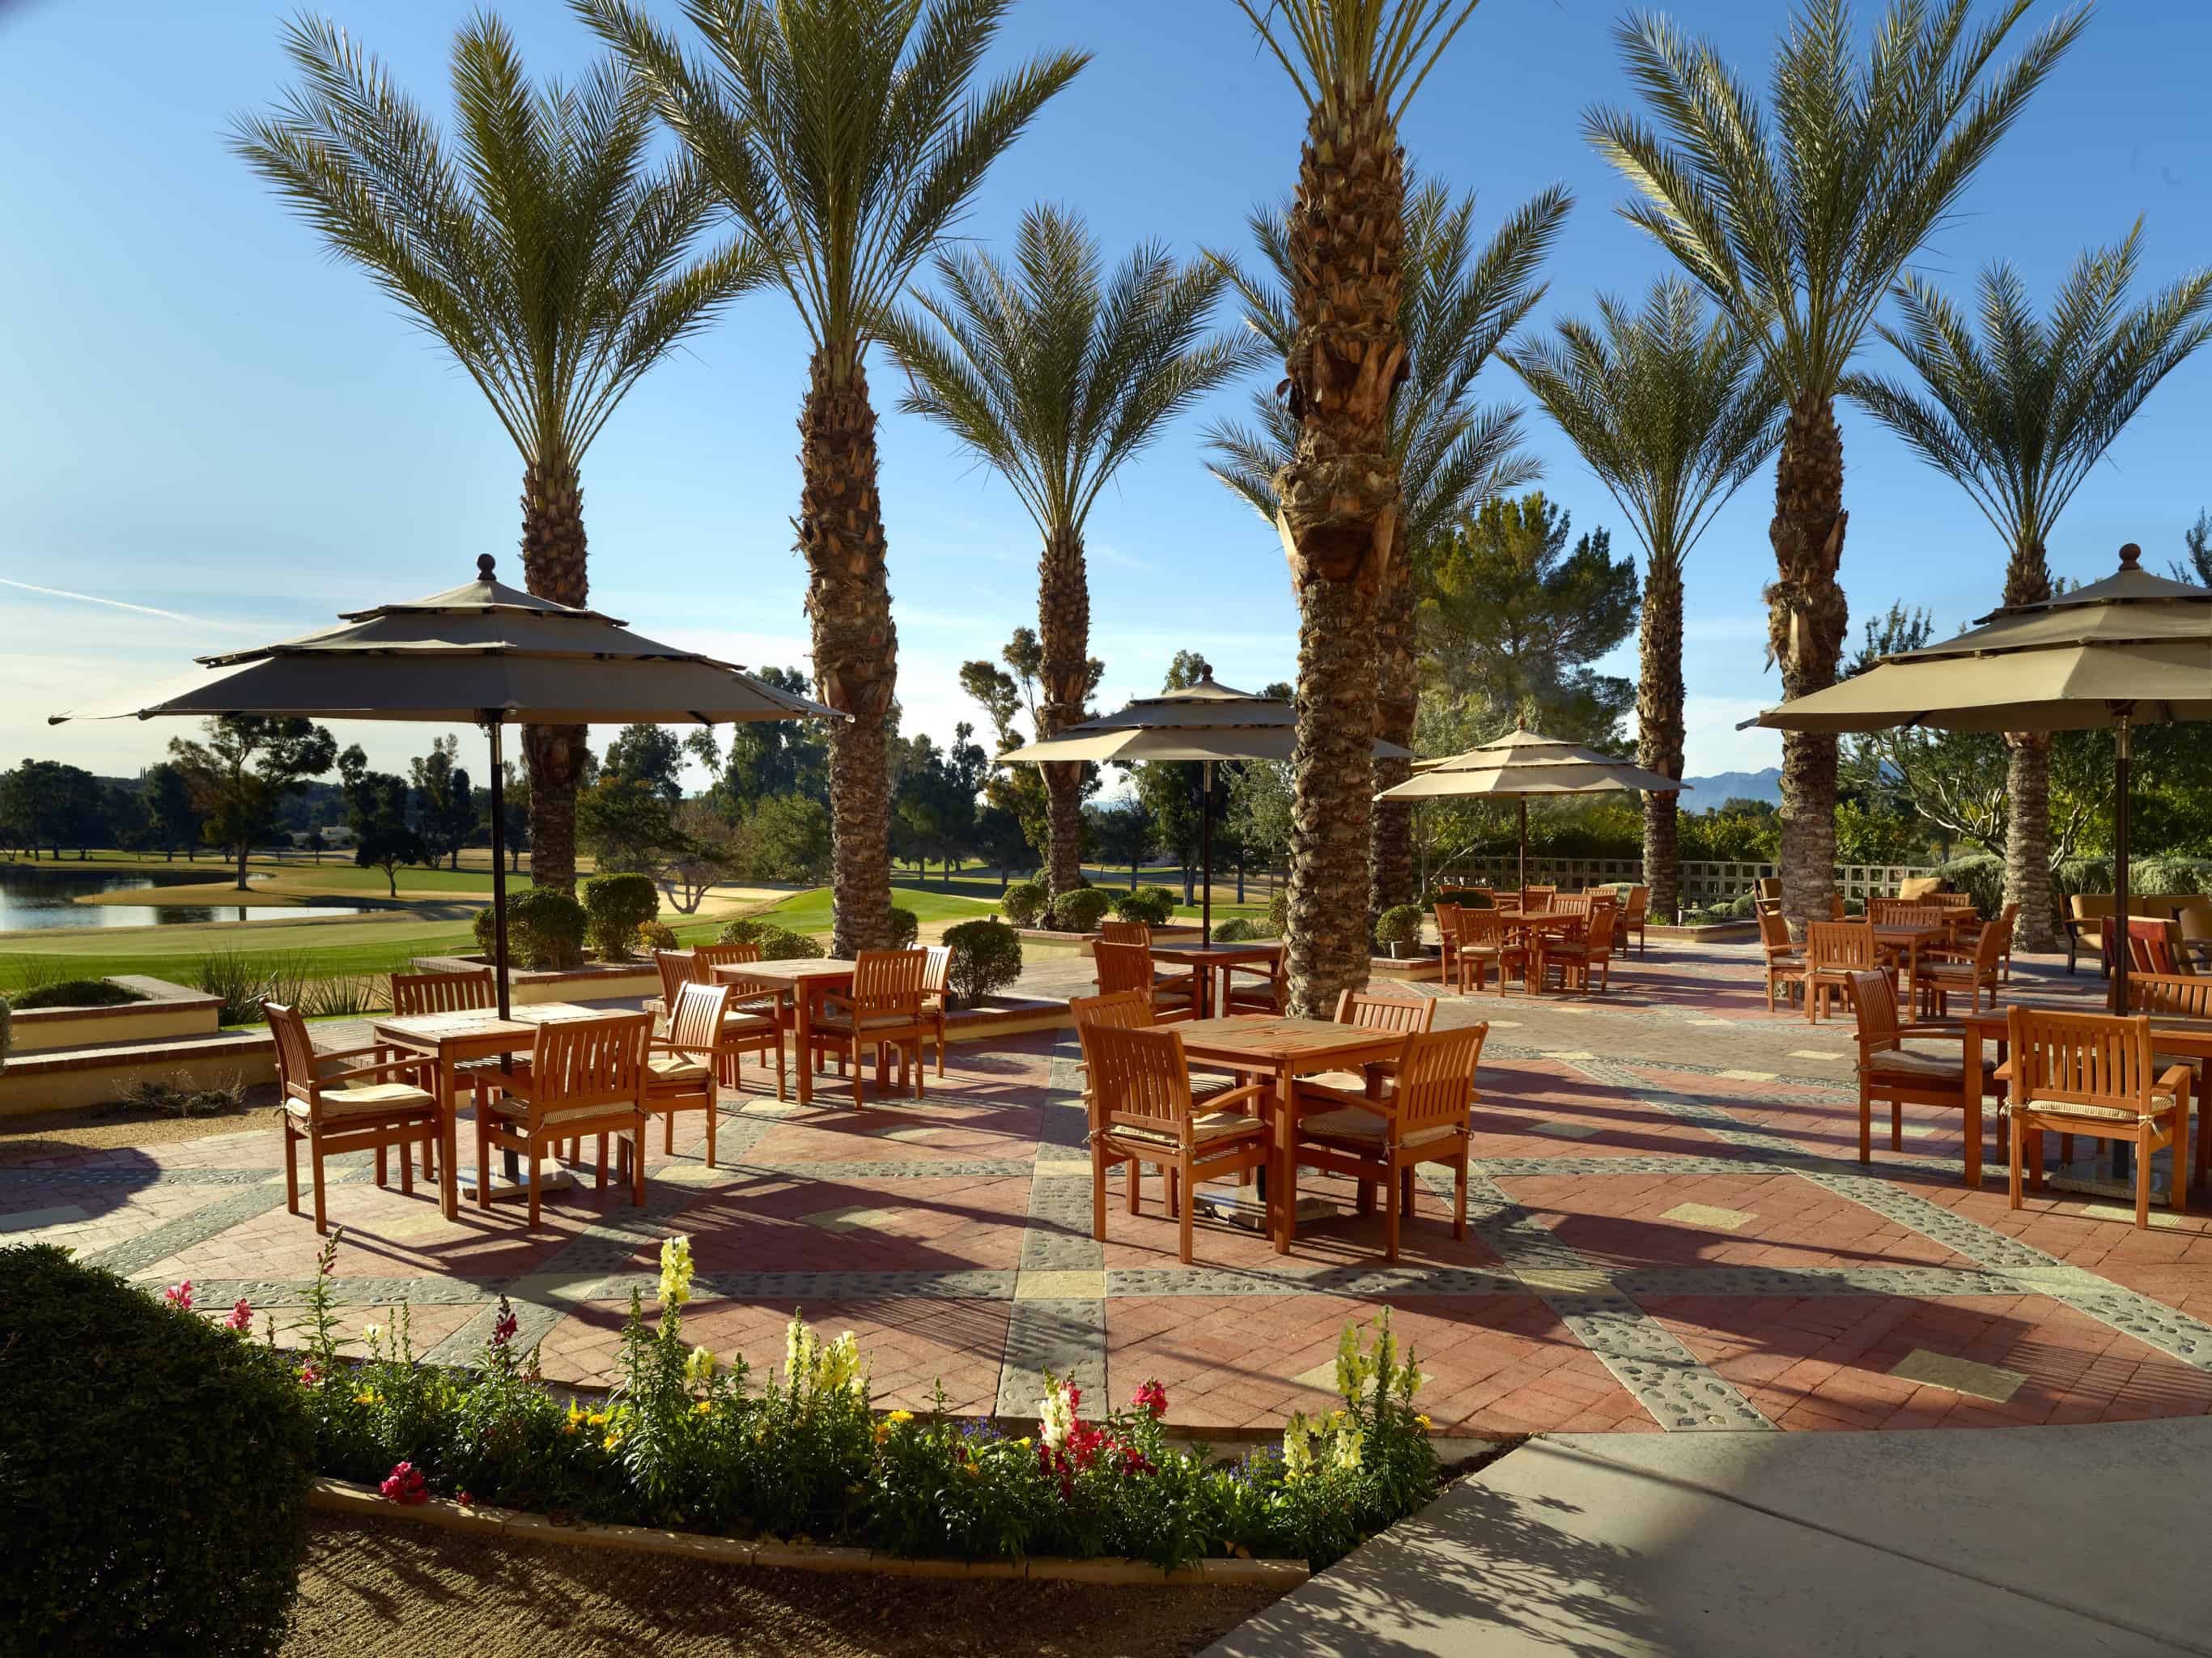 Legends Outdoor Dining Omni Tucson National Resort | Resort Report: Omni Tucson National Resort